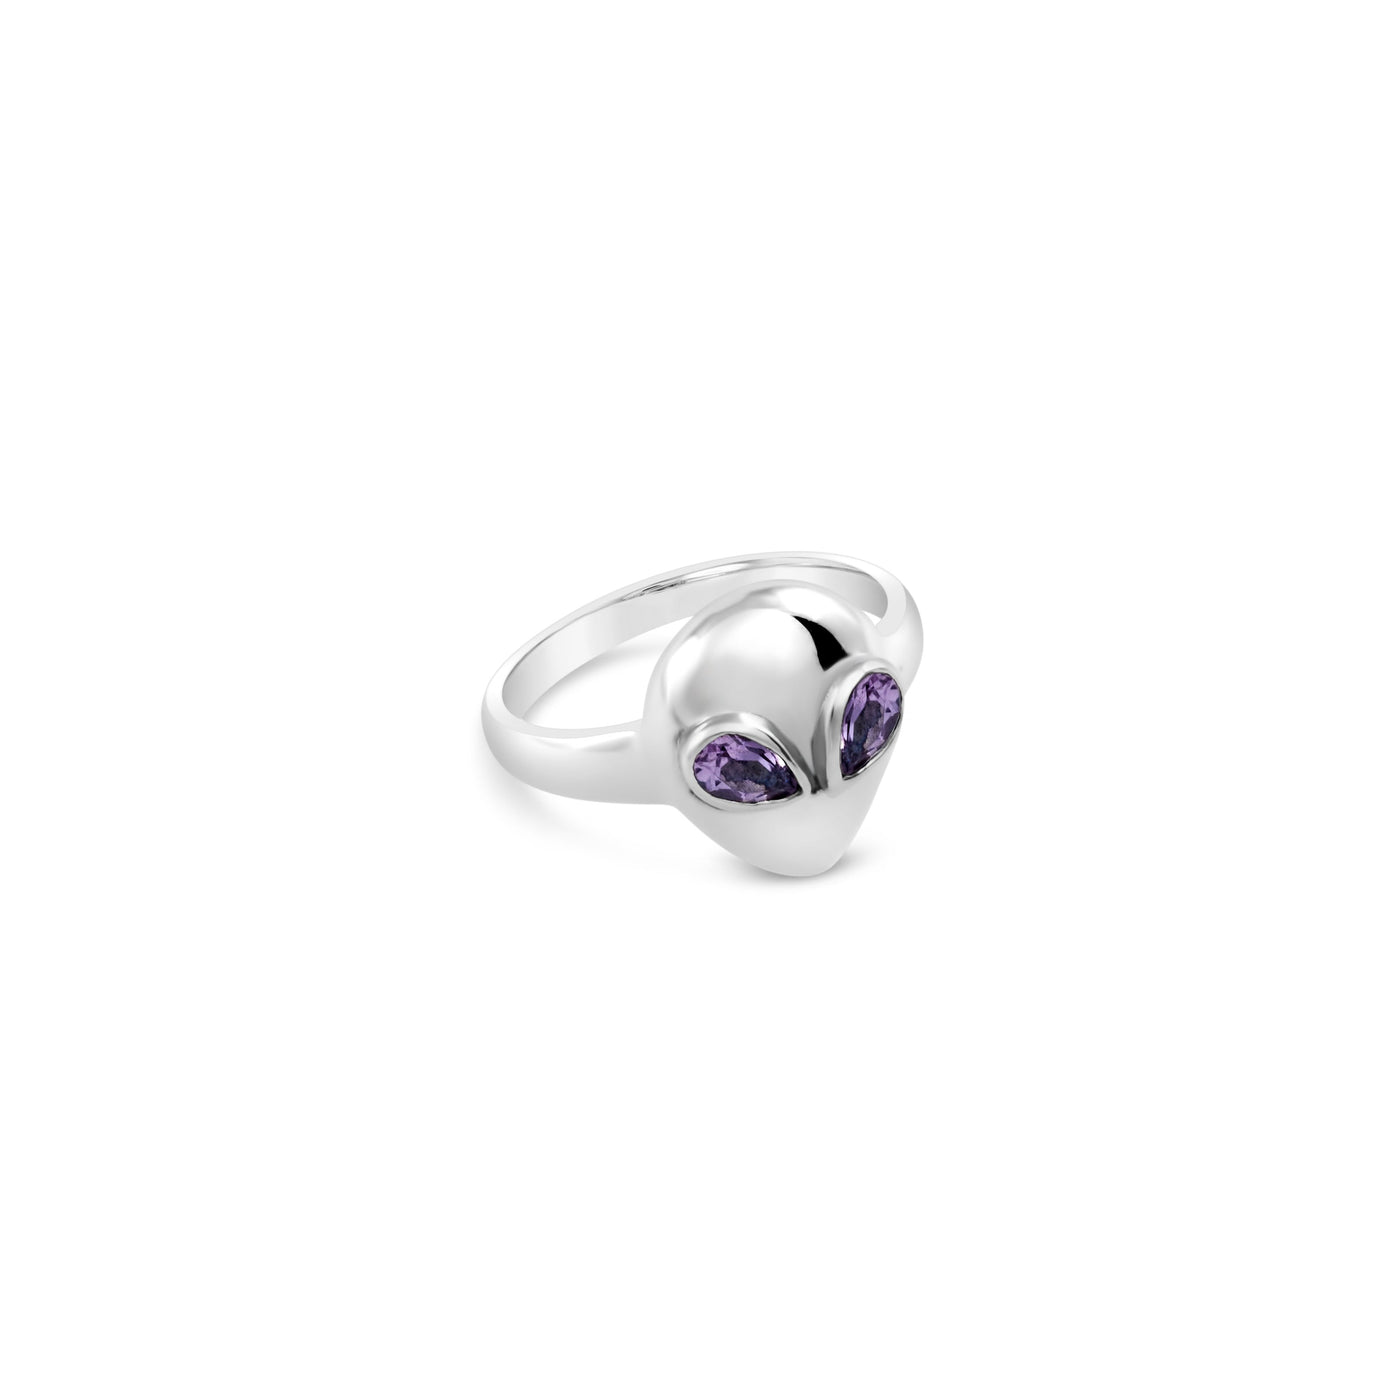 I Come In Peace Gemstone Alien Ring - Amethyst